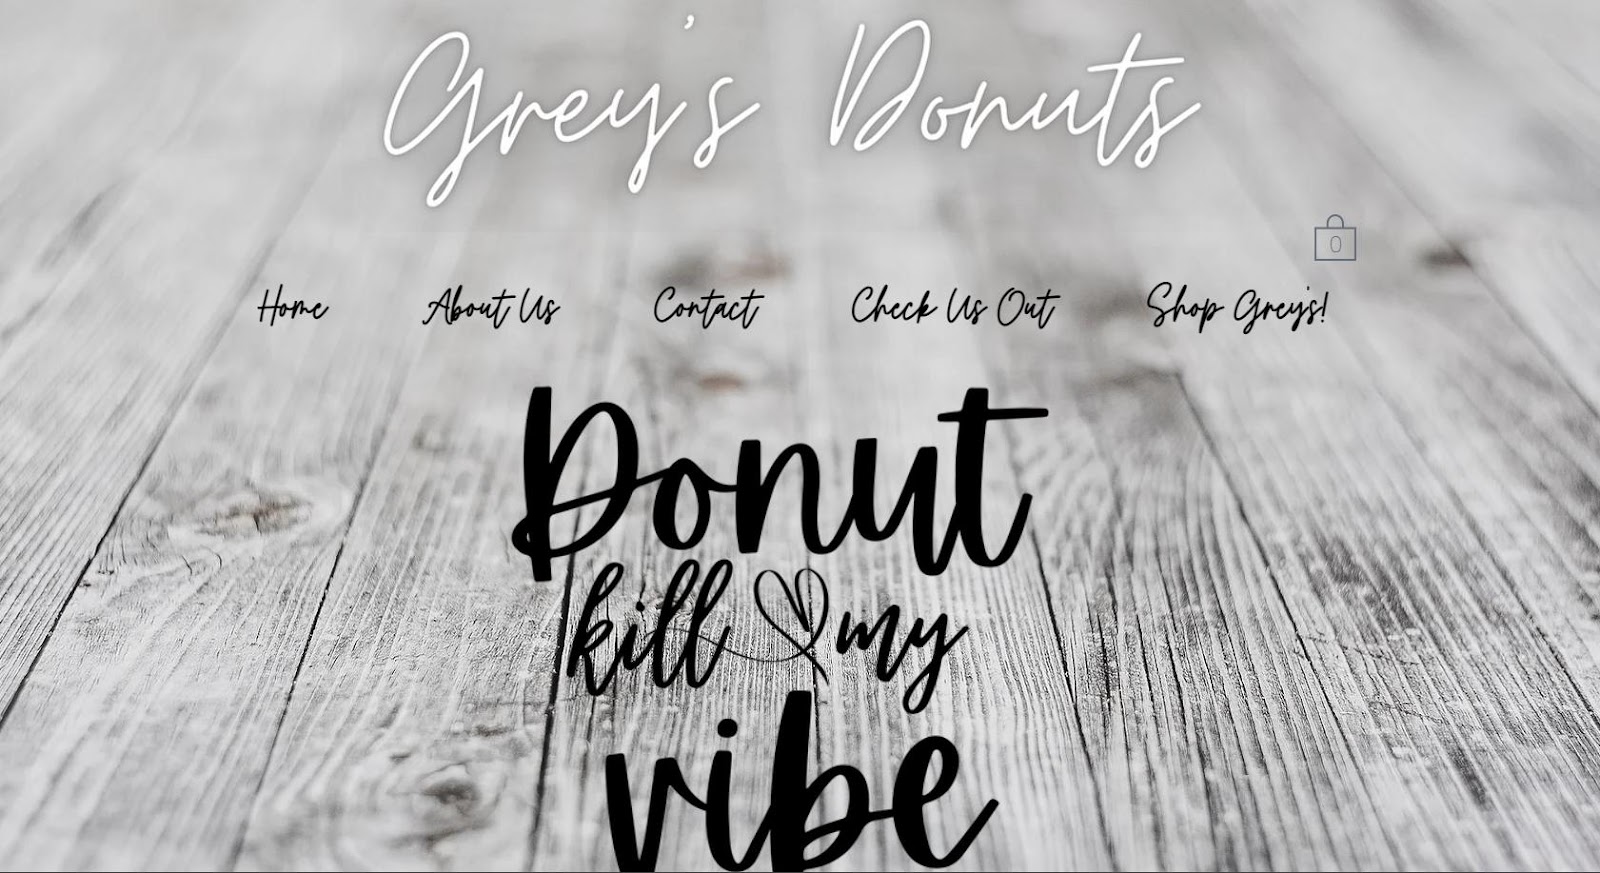 Food truck website design example from Grey’s Donuts.